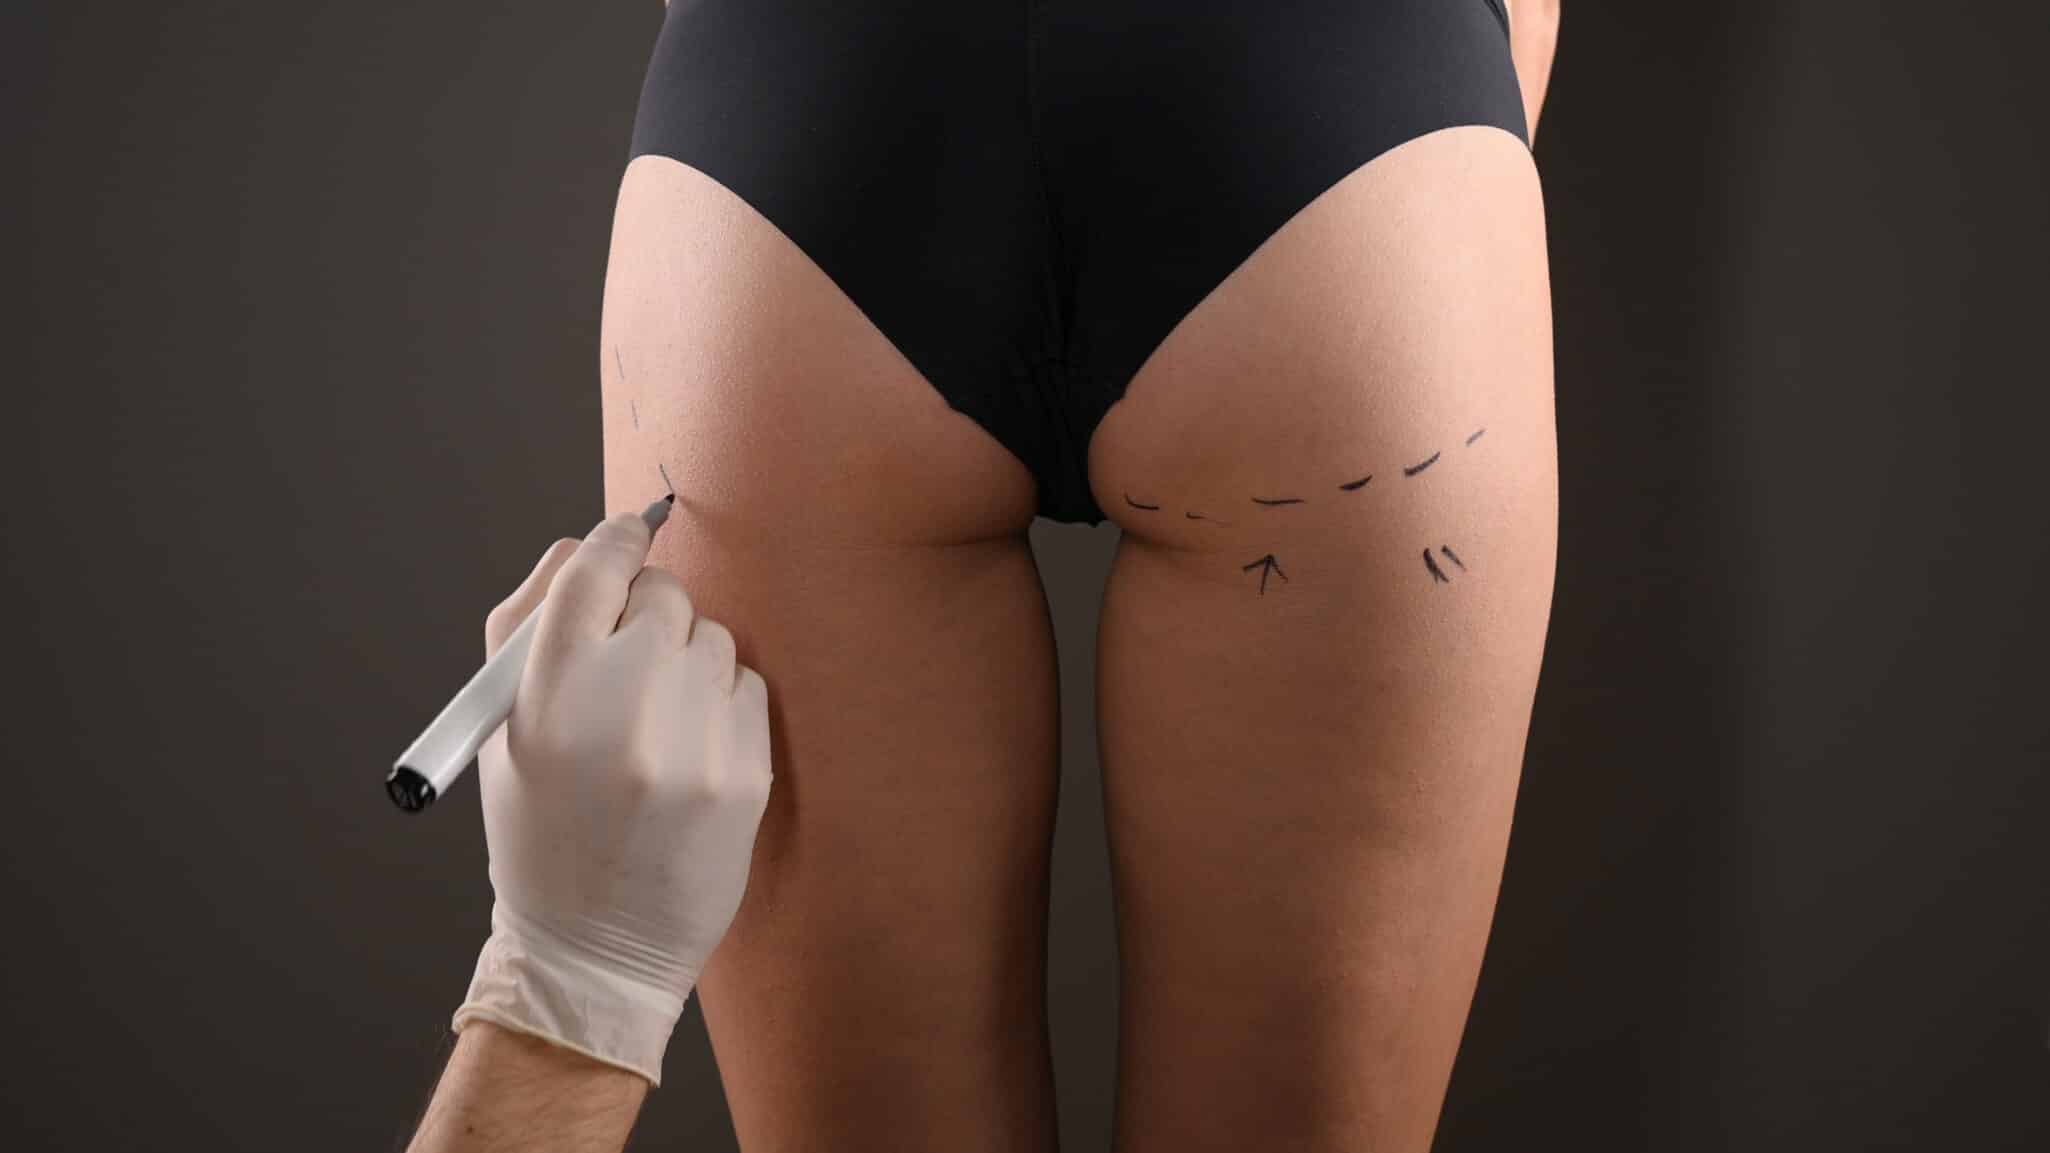 Buttock augmentation, sometimes referred to as a BBL or Brazilian Butt Lift  using your own fat or implants, can surgically increase the s